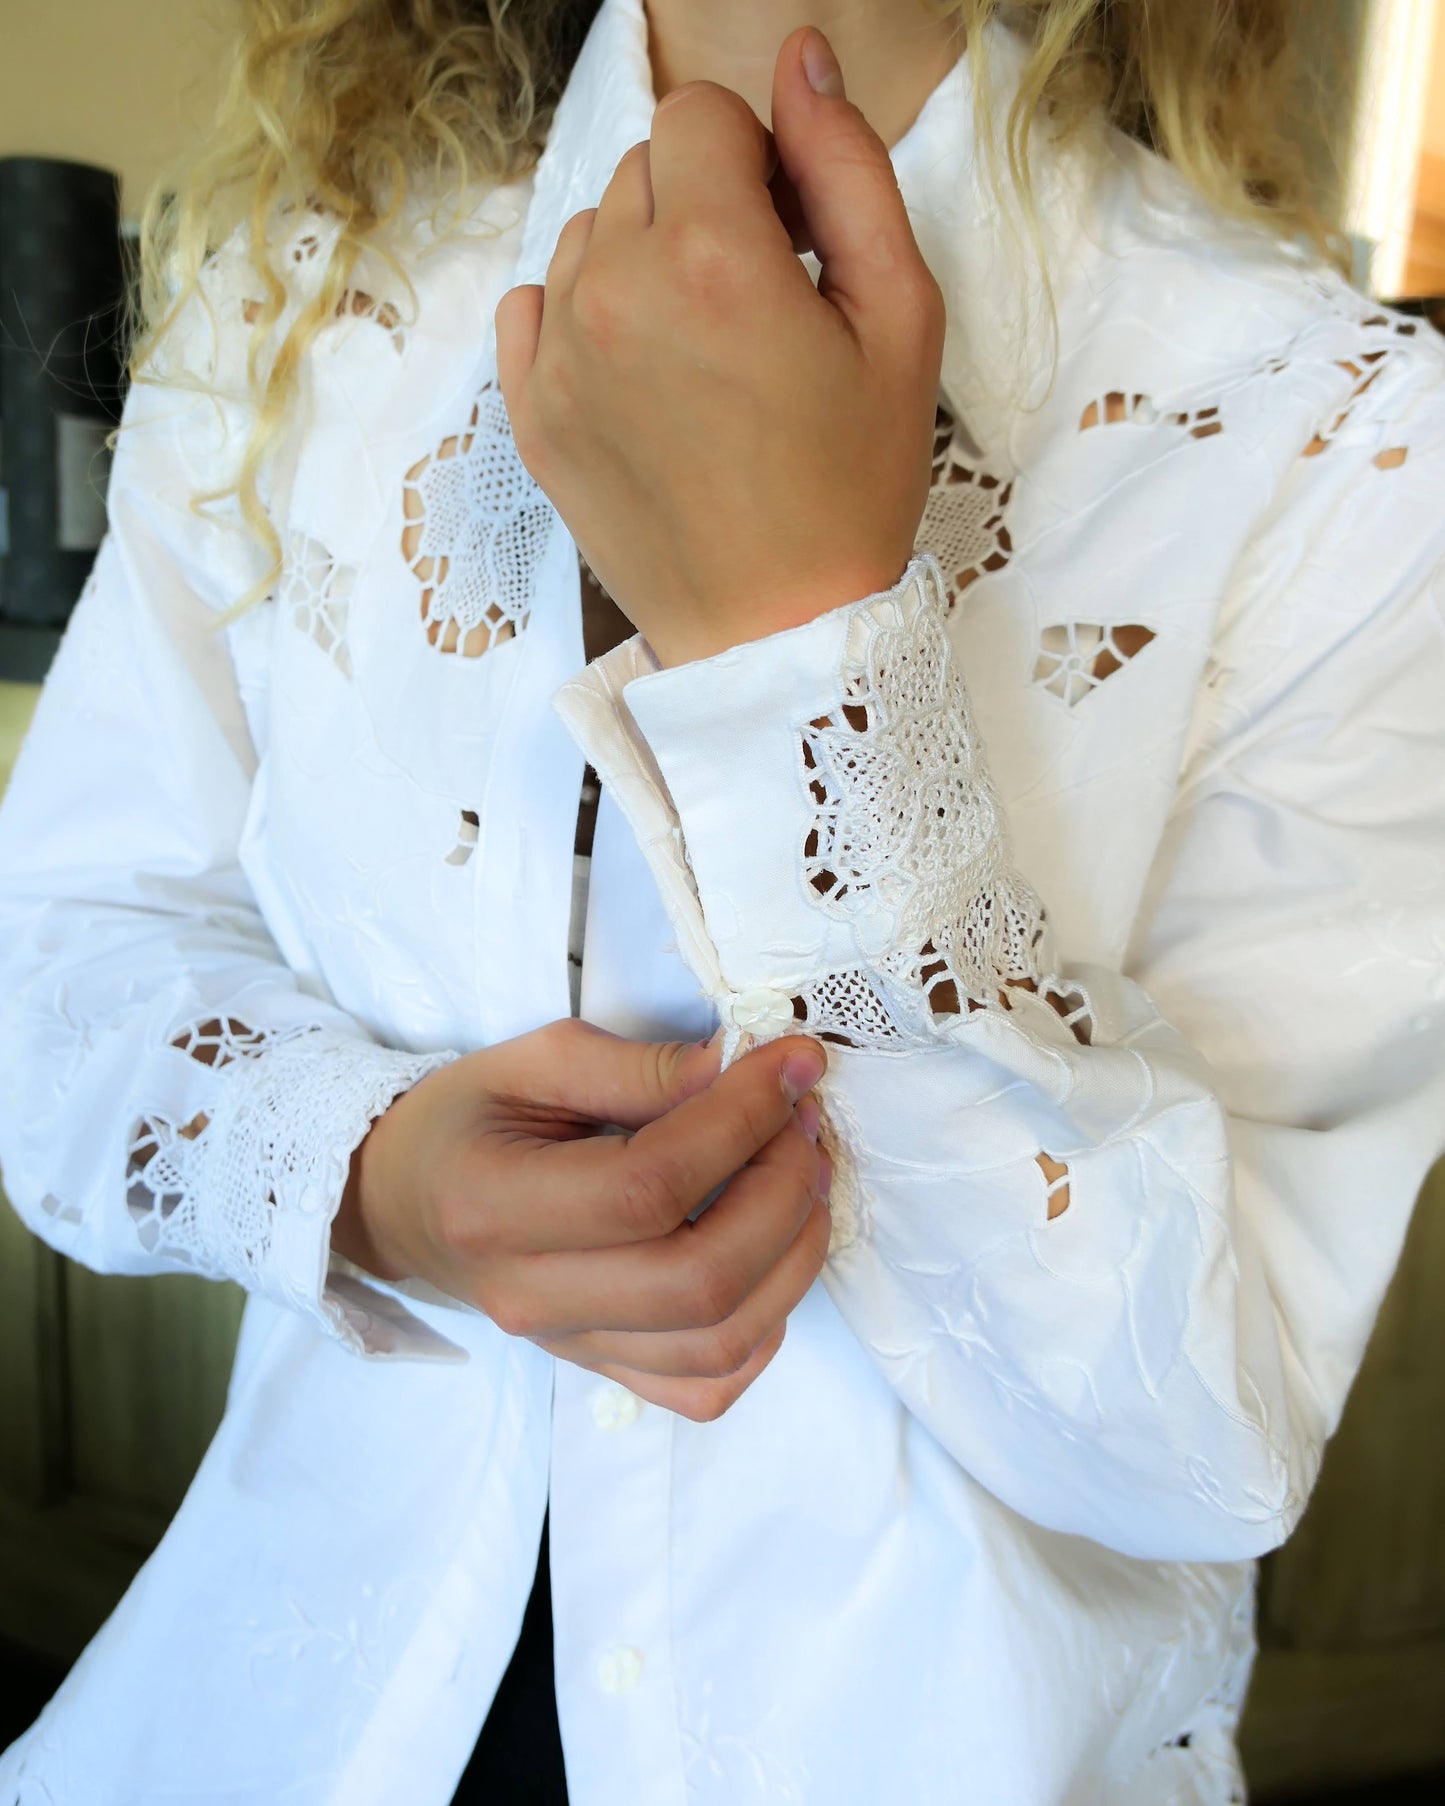 Uplift your everyday wardrobe with this cotton long sleeve shirt made with our vintage cutout and hand embroidered fabric. Embroidered and cutout detail in the collar, cuffs, and hemline make this shirt ultra-feminine and unique.  Note that the fabric is made with a thicker cotton fabric.  Comes in Small, Medium, and Large sizes.  